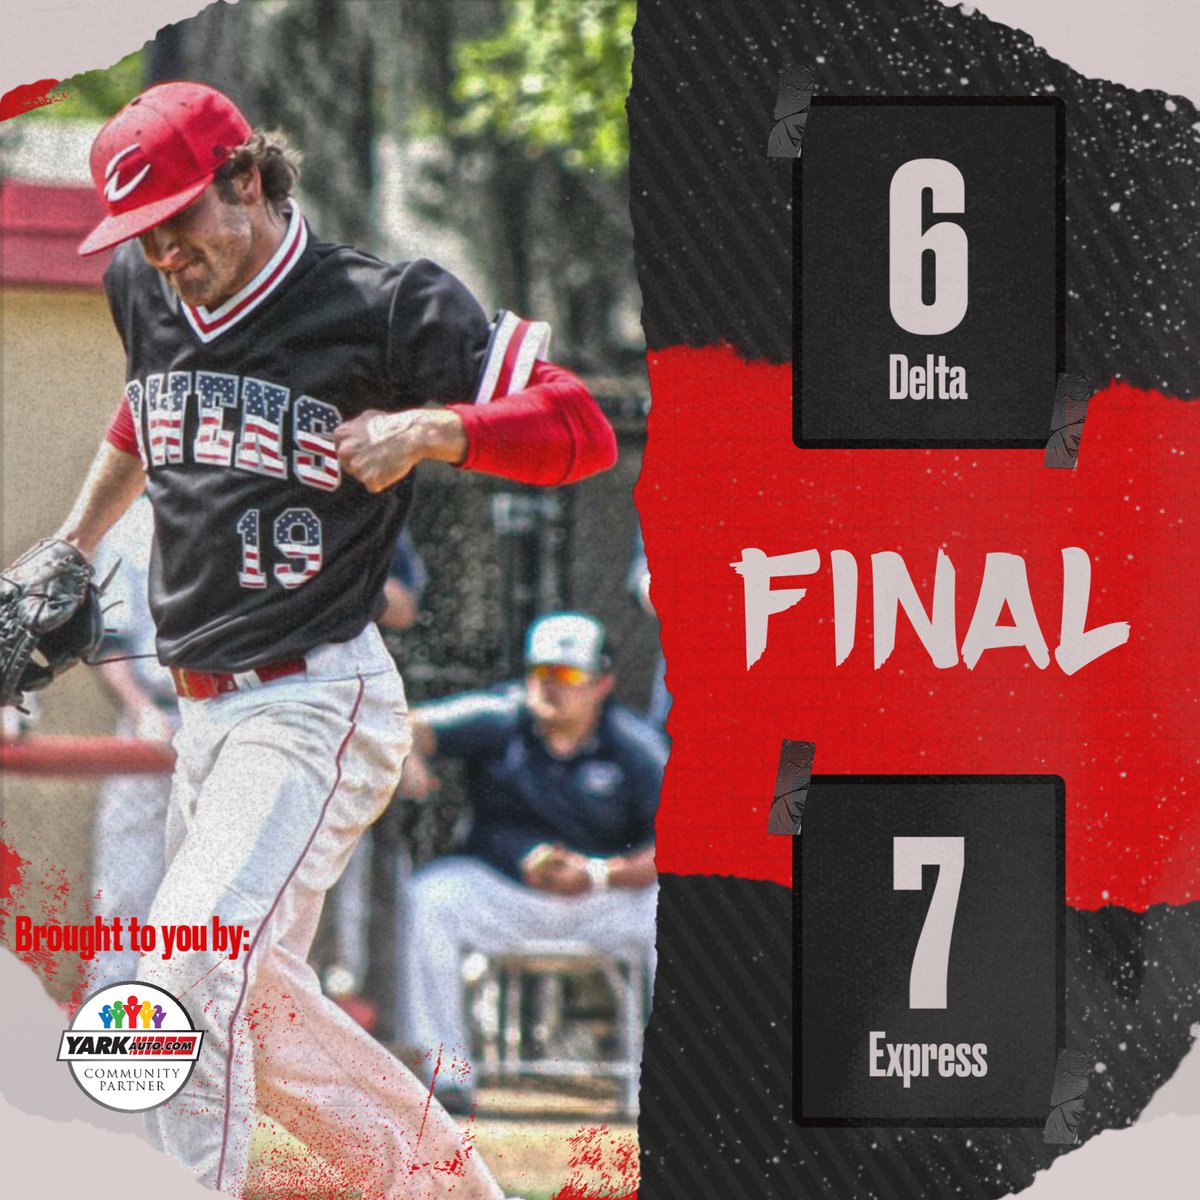 Express wins game 2. Colin Leasure gets the win. @imkirkgibson 2 for 3 and 2 RBI’s @jakemiller311 2 for 4 with game winning rbi. @HadrynNowicki with the huge game tying double. @YarkAuto